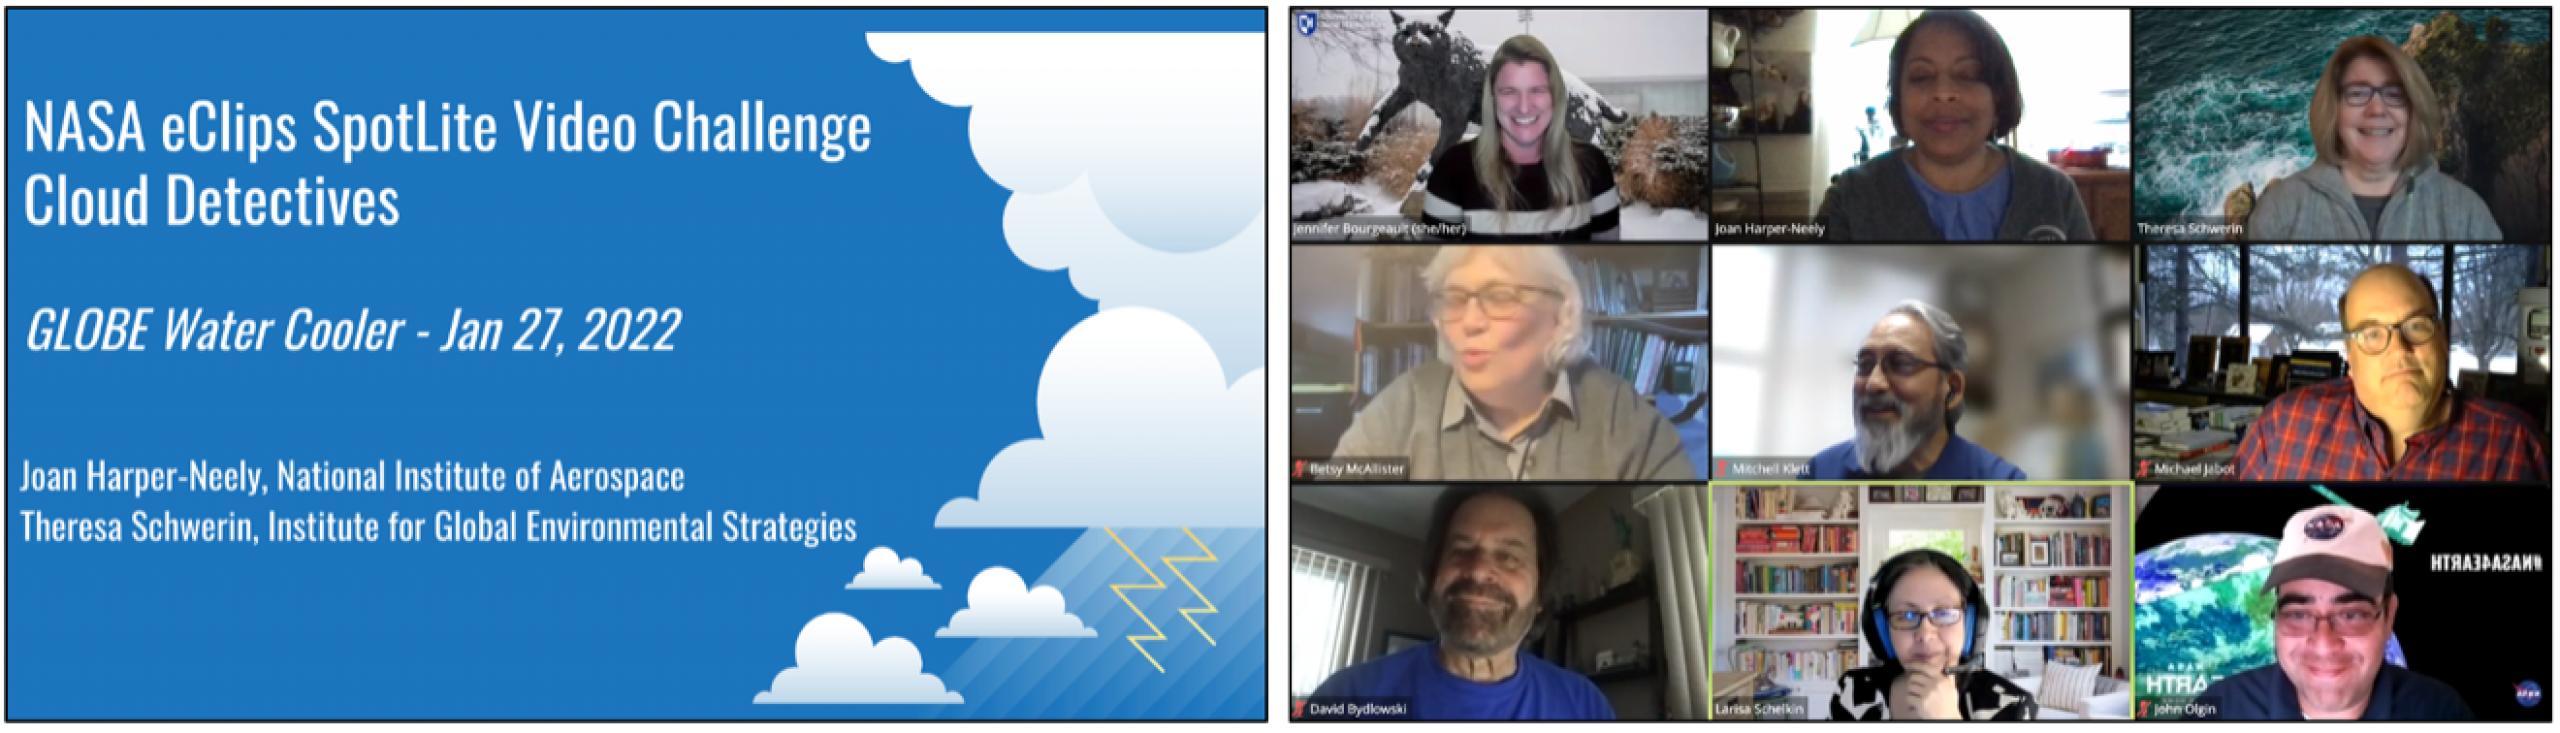 Screenshots from the NASA Spotlite Challenge: Cloud Detectives presentation during the GLOBE/Earth Systems Science (ESS) Collaborative Water Cooler webinar.